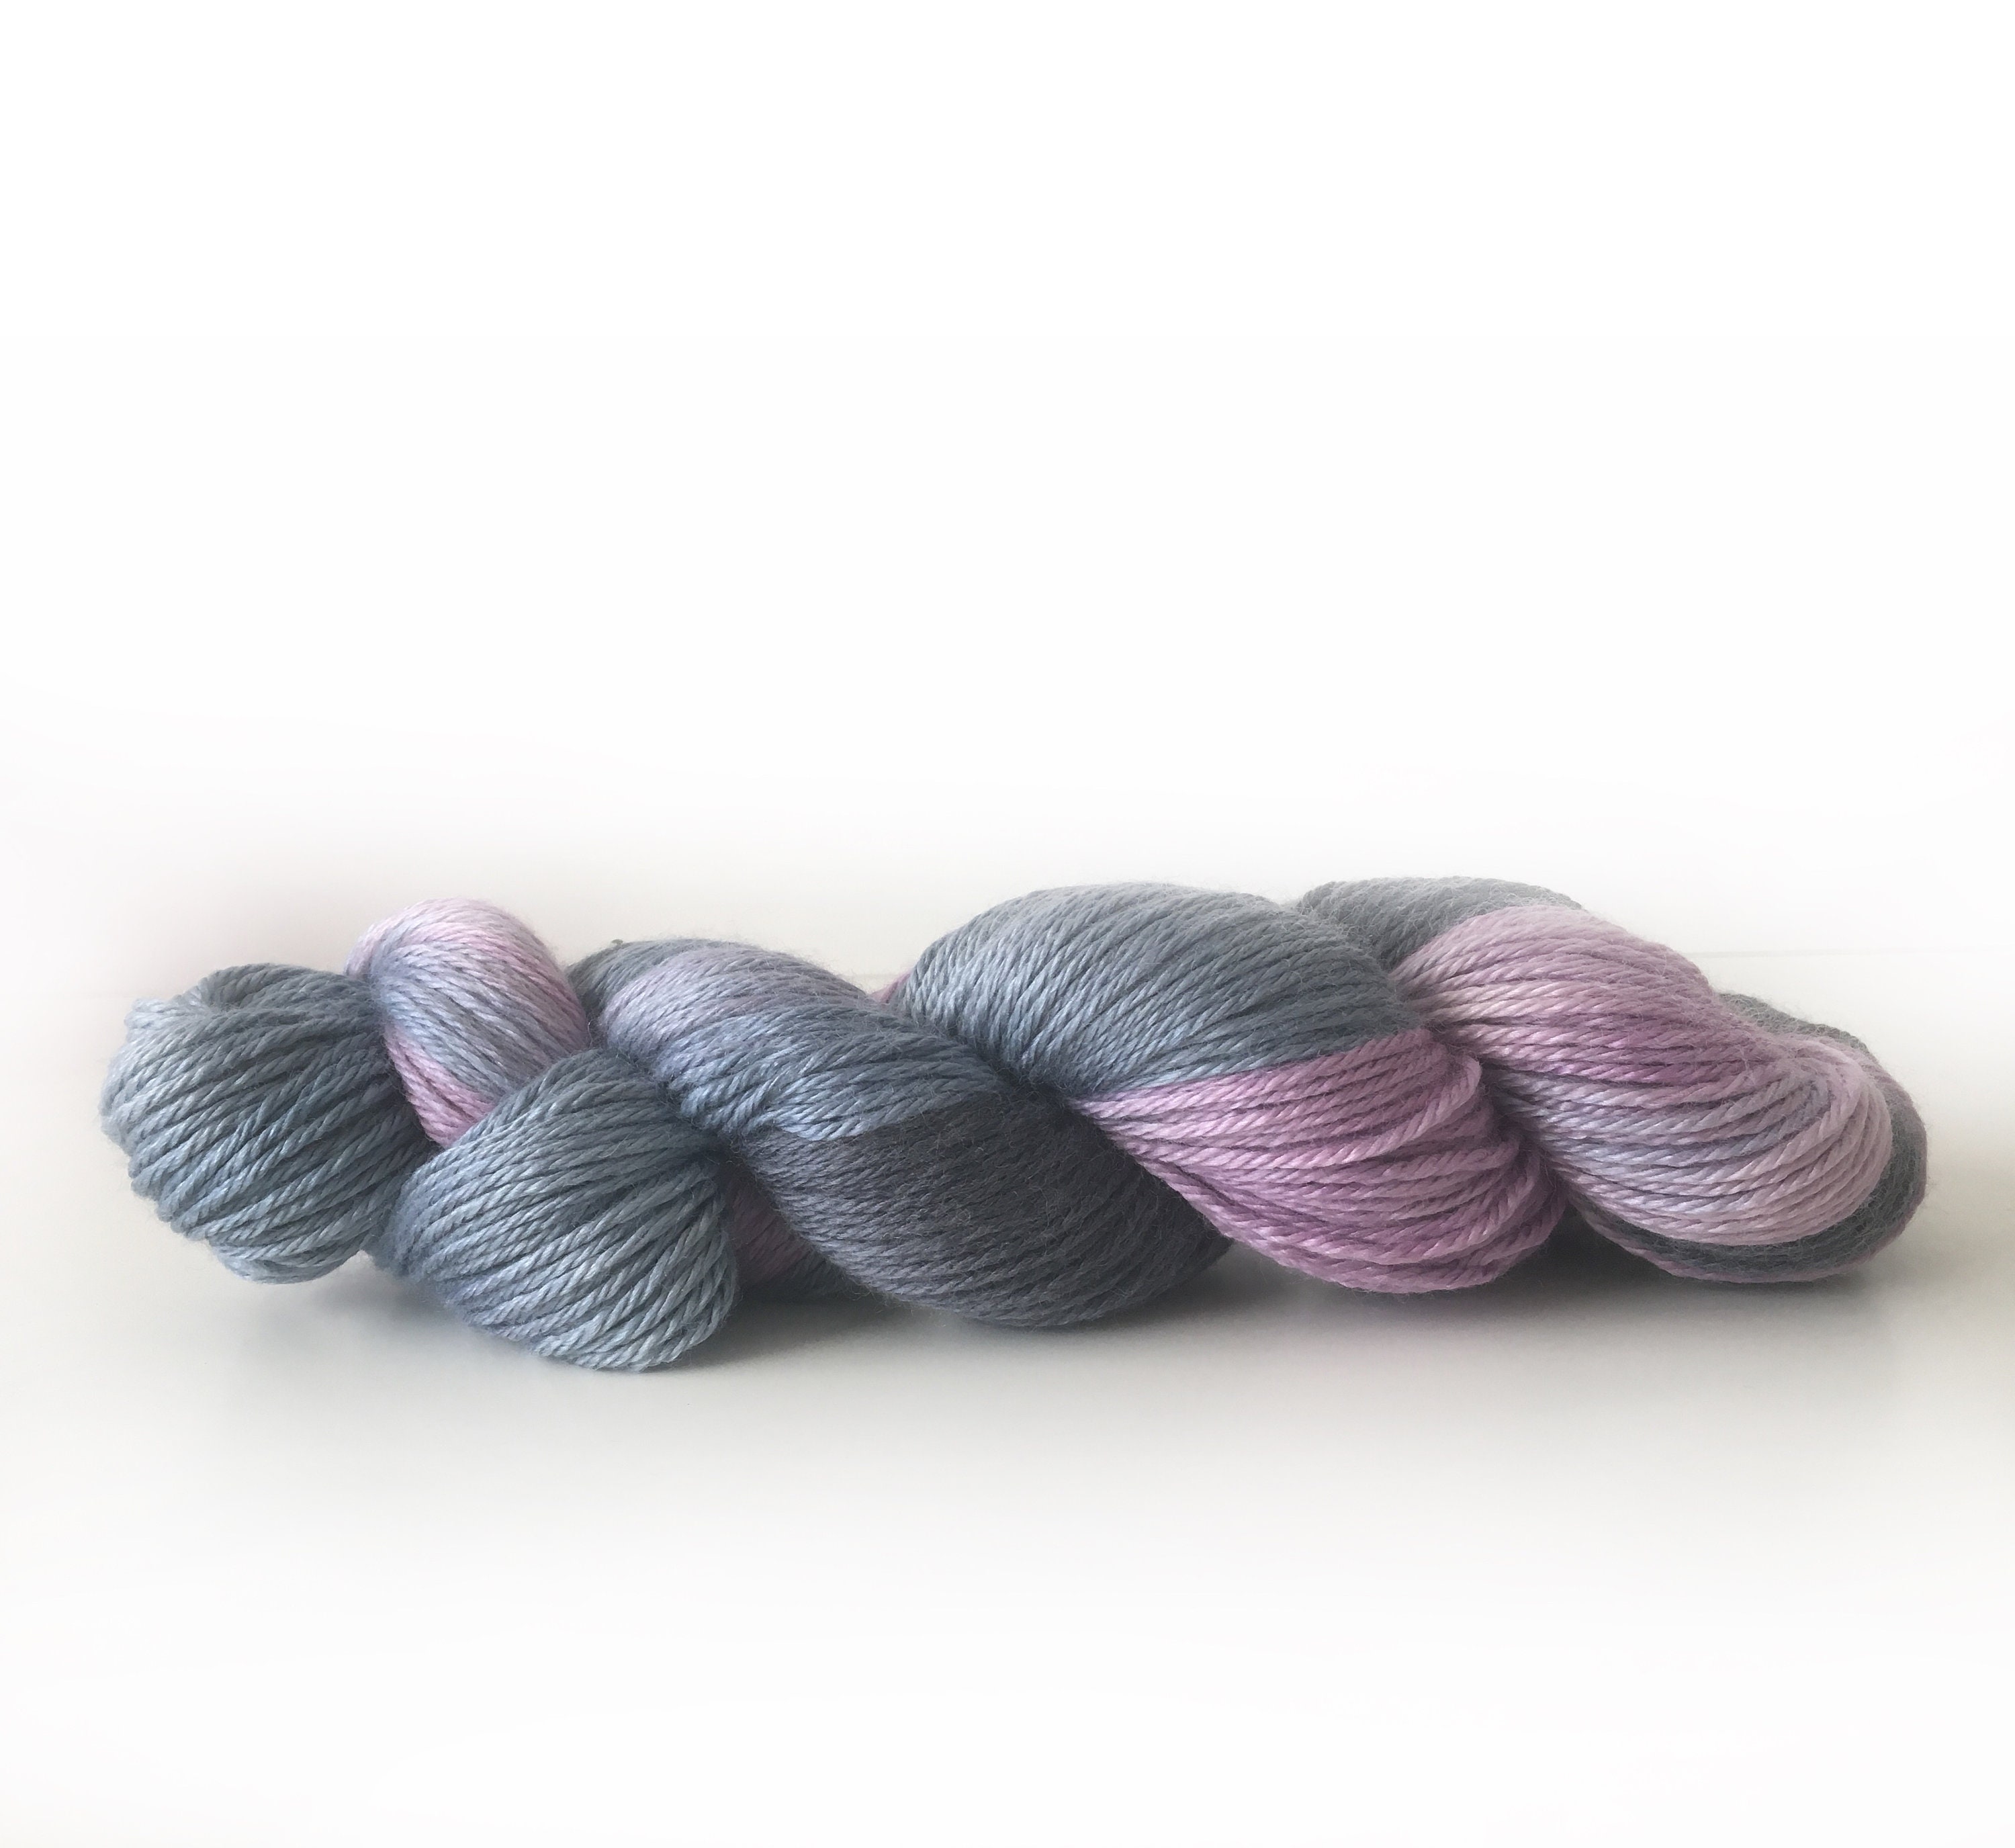 Wool & Silk Blend Yarn . Worsted Hand Dyed 220 Yards 100 G Wild Lilac Moon's Full Moon Color Findings"